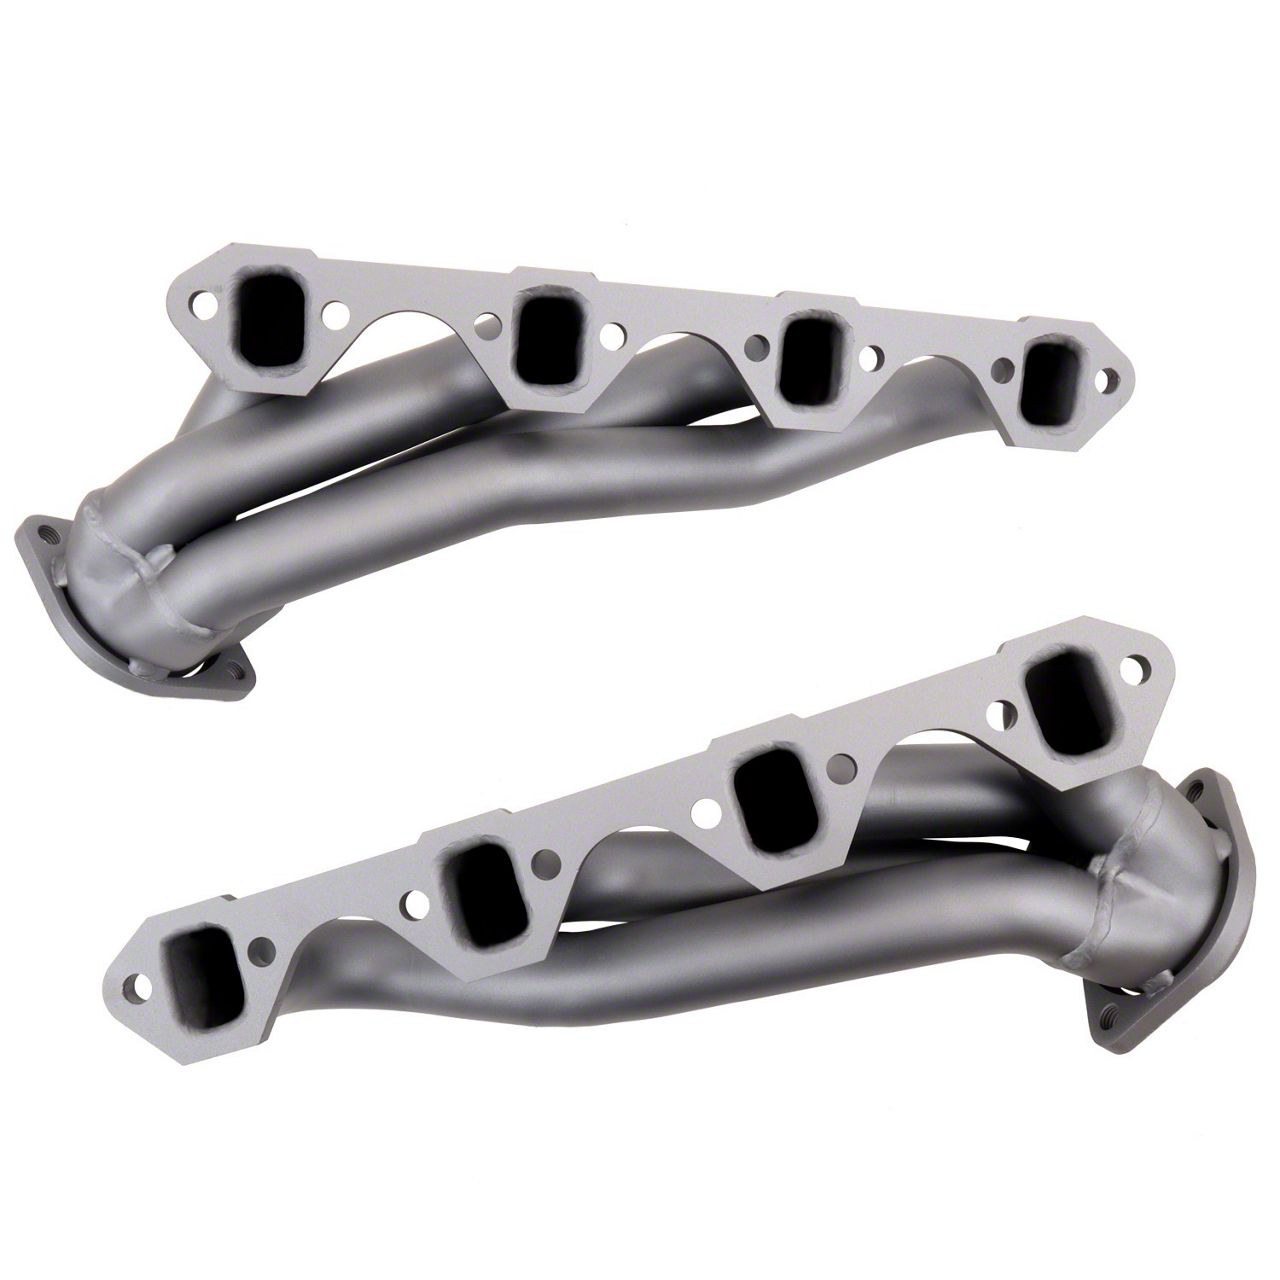 Shorty Racing Header Fits for Ford Mustang 1979-1993 5.0L 302 GT/LX/SVT V8 Stainless Performance Exhaust Header 